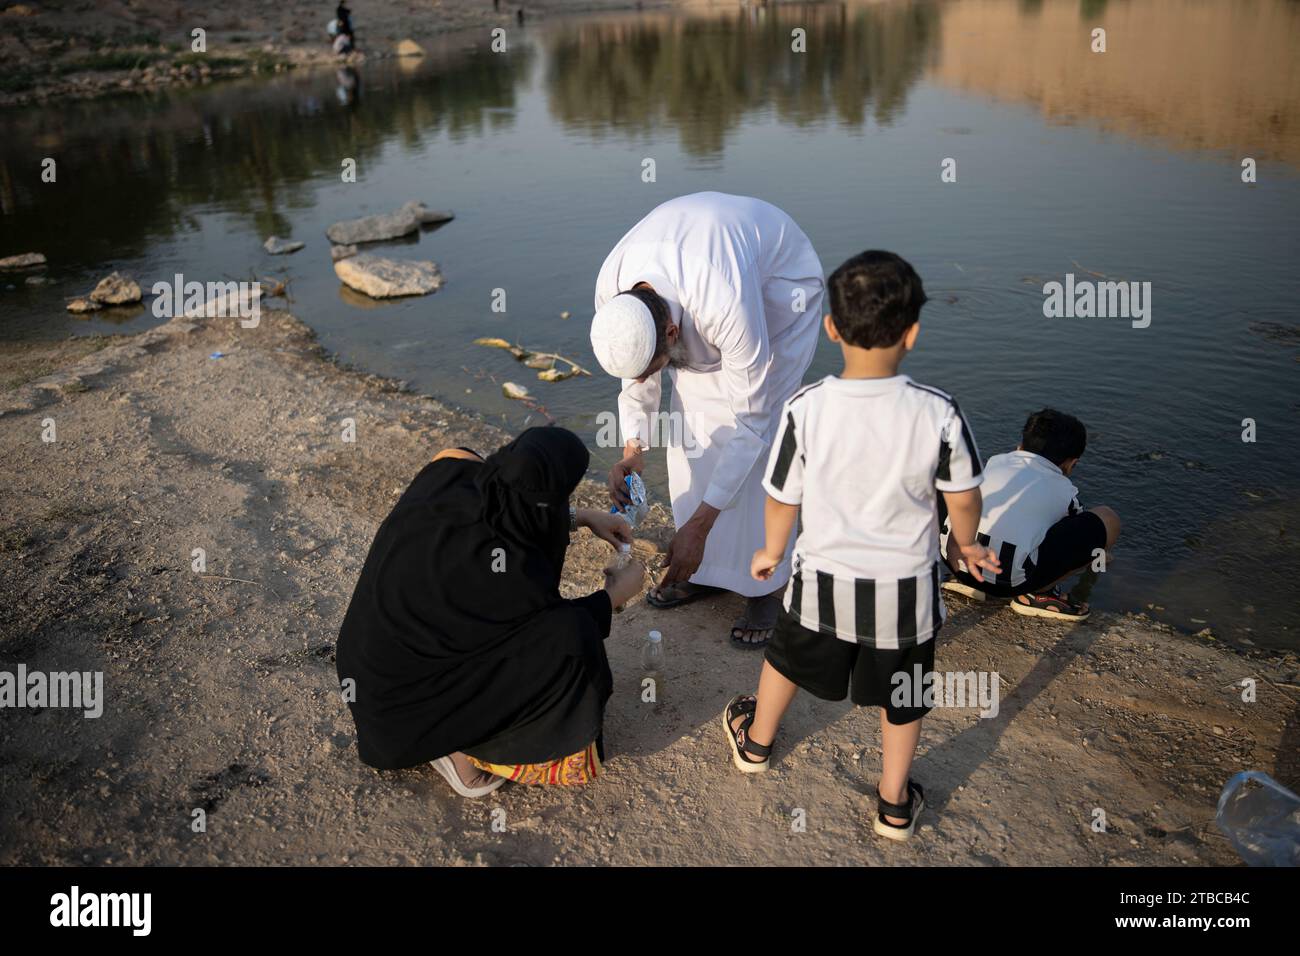 Daily life at Wadi Hanifa in Riyadh, Saudi Arabia on October 15, 2022, during the Noor Riyadh Festival 2022. Wadi Hanifa, historically known as Wadi al-Arad, is a wadi (seasonal river) in the Najd region, Riyadh Province, in central Saudi Arabia. The valley runs for a length of 120 km from northwest to southeast, cutting through the city of Riyadh. A string of towns and villages lie along the valley, including Uyaynah, Irqah and Diriyah. The historical city of Riyadh itself is on the northeastern side of the wadi, but the city has now expanded across Wadi Hanifa, with the sub-municipalities of Stock Photo